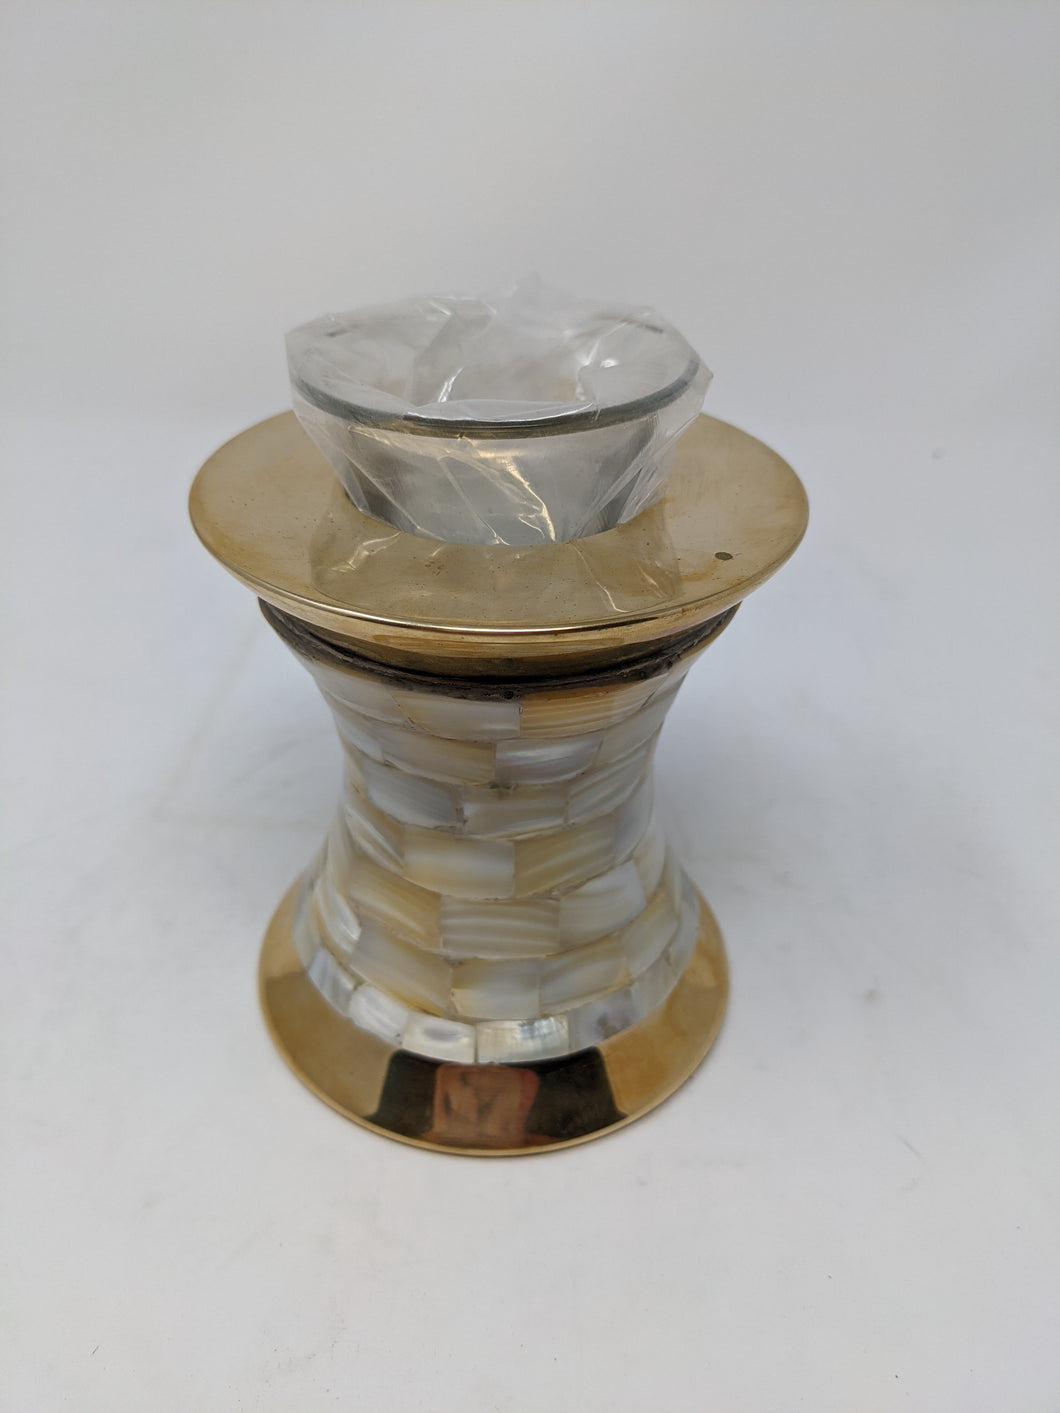 Scratch & Dent Mother of Pearl and Gold Tealight Candle